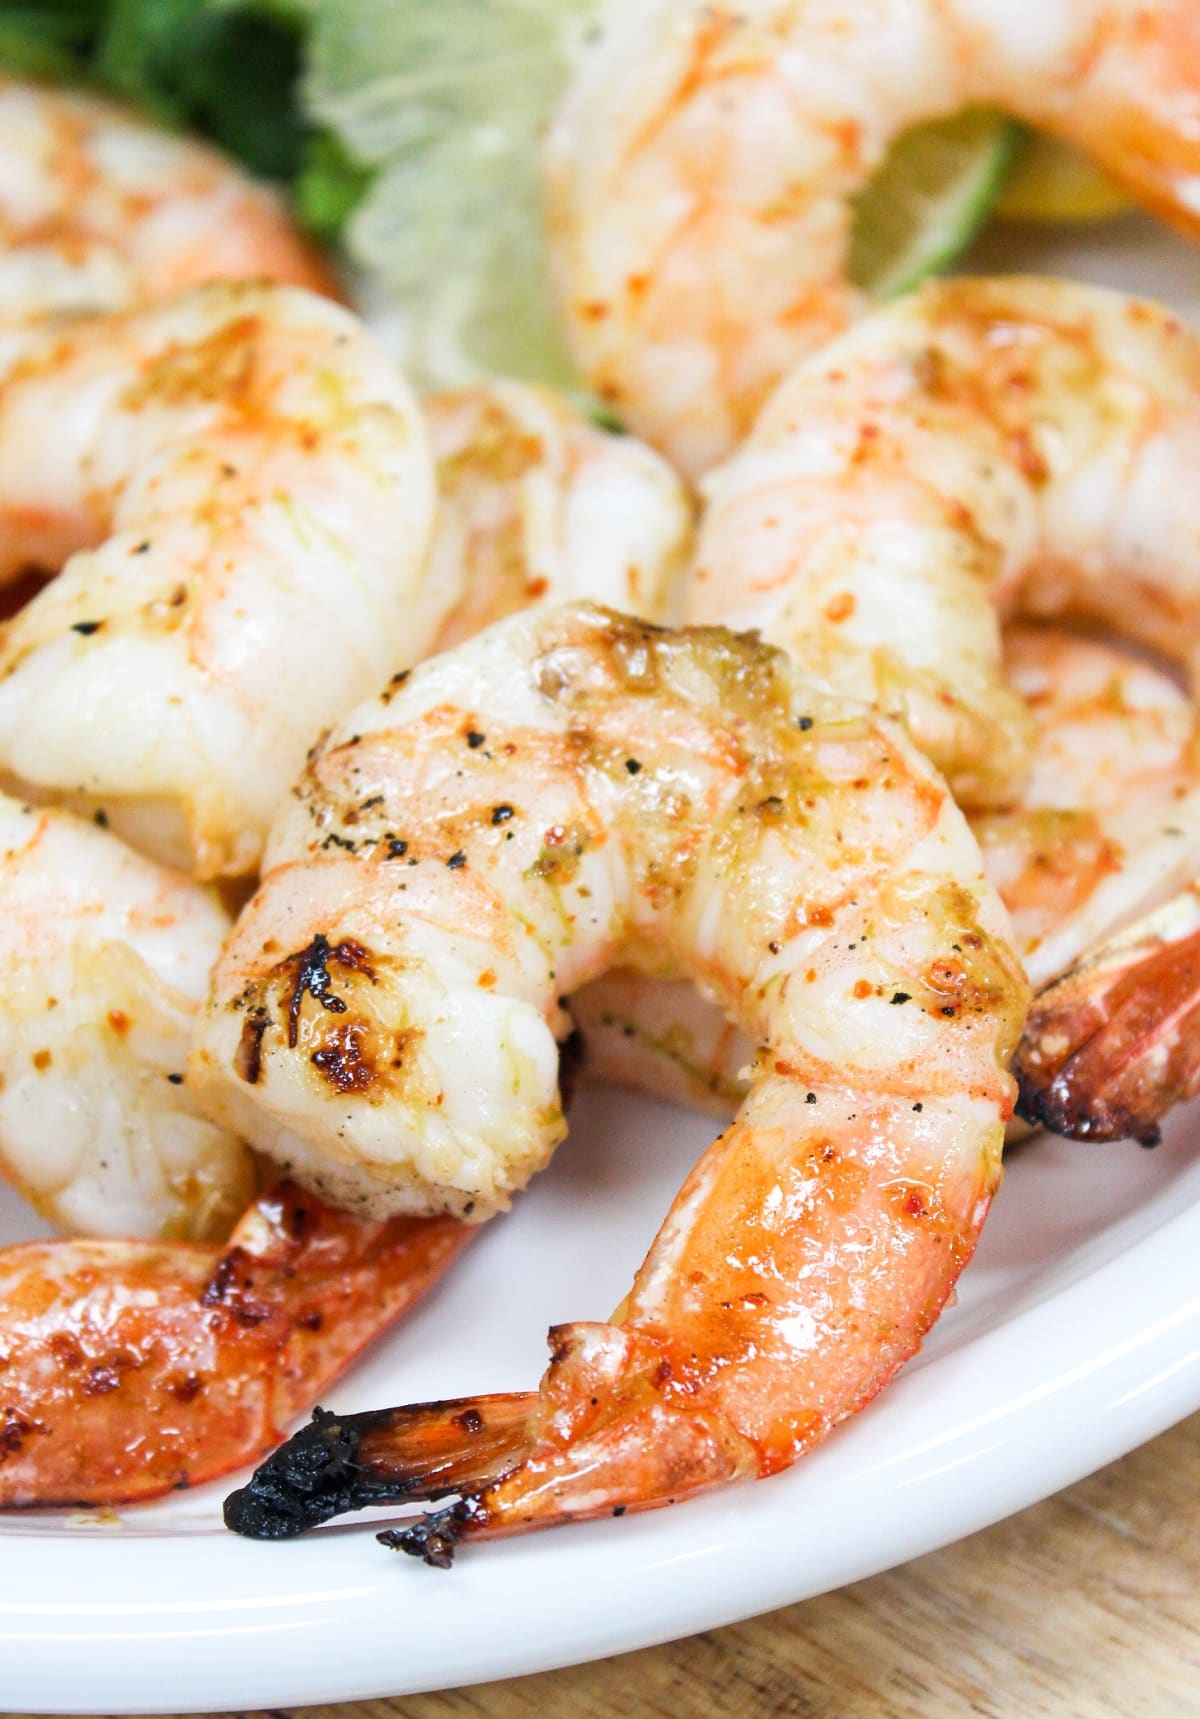 Grilled shrimp on a white plate.